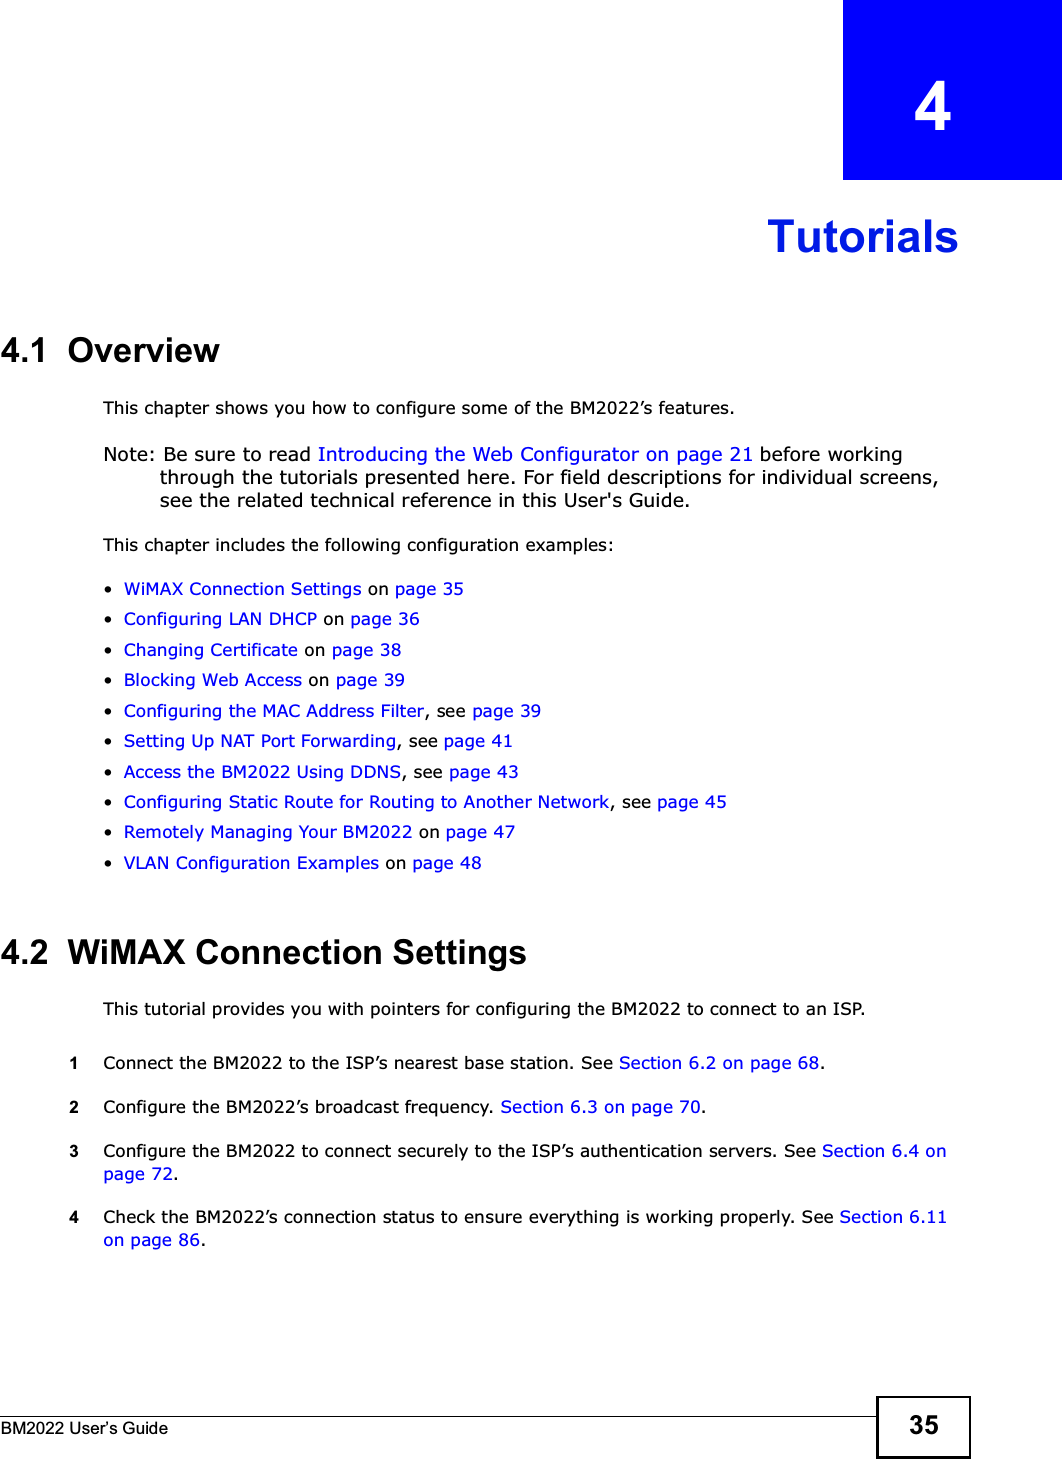 BM2022 Users Guide 35CHAPTER   4Tutorials4.1  OverviewThis chapter shows you how to configure some of the BM2022s features.Note: Be sure to read Introducing the Web Configurator on page 21 before working through the tutorials presented here. For field descriptions for individual screens, see the related technical reference in this User&apos;s Guide.This chapter includes the following configuration examples:WiMAX Connection Settings on page 35Configuring LAN DHCP on page 36Changing Certificate on page 38Blocking Web Access on page 39Configuring the MAC Address Filter, see page 39Setting Up NAT Port Forwarding, see page 41Access the BM2022 Using DDNS, see page 43Configuring Static Route for Routing to Another Network, see page 45Remotely Managing Your BM2022 on page 47VLAN Configuration Examples on page 484.2  WiMAX Connection SettingsThis tutorial provides you with pointers for configuring the BM2022 to connect to an ISP.1Connect the BM2022 to the ISPs nearest base station. See Section 6.2 on page 68.2Configure the BM2022s broadcast frequency. Section 6.3 on page 70.3Configure the BM2022 to connect securely to the ISPs authentication servers. See Section 6.4 on page 72.4Check the BM2022s connection status to ensure everything is working properly. See Section 6.11 on page 86.